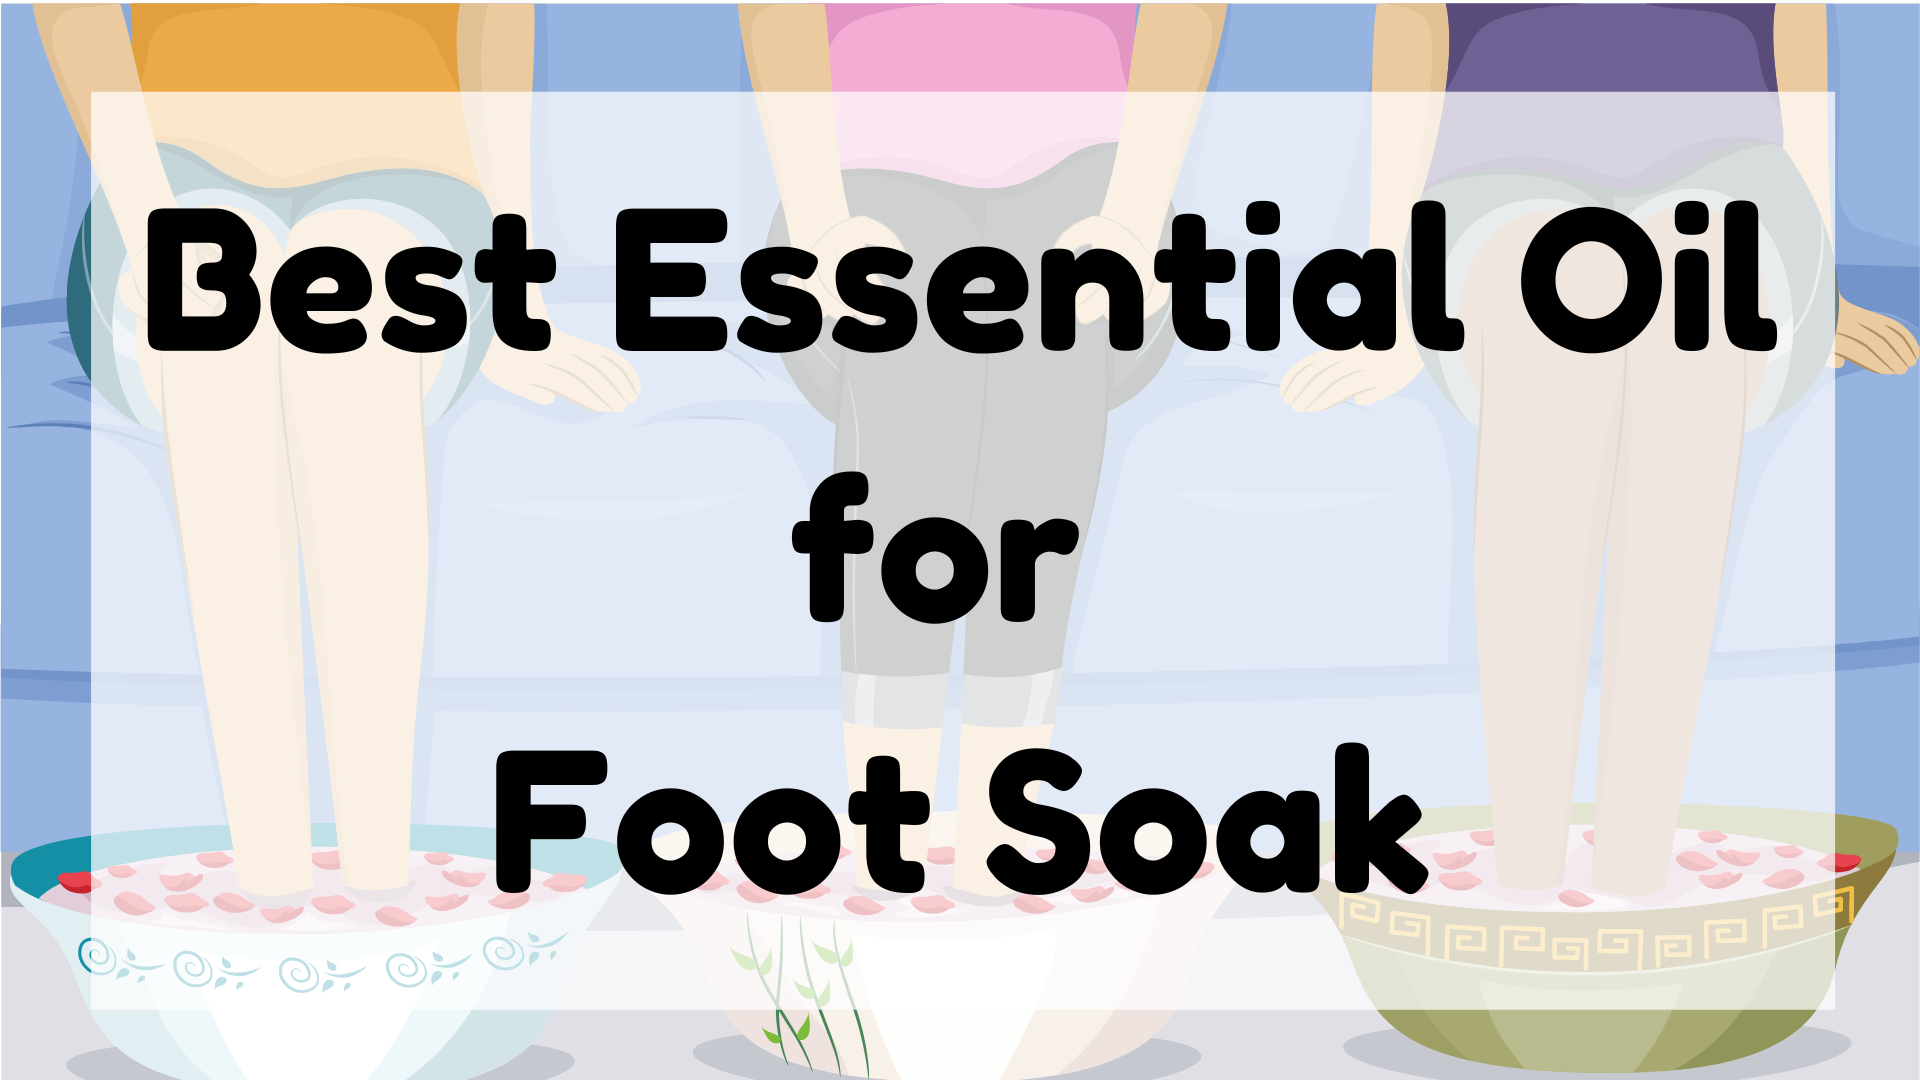 Best Essential Oil for Foot Soak featured image